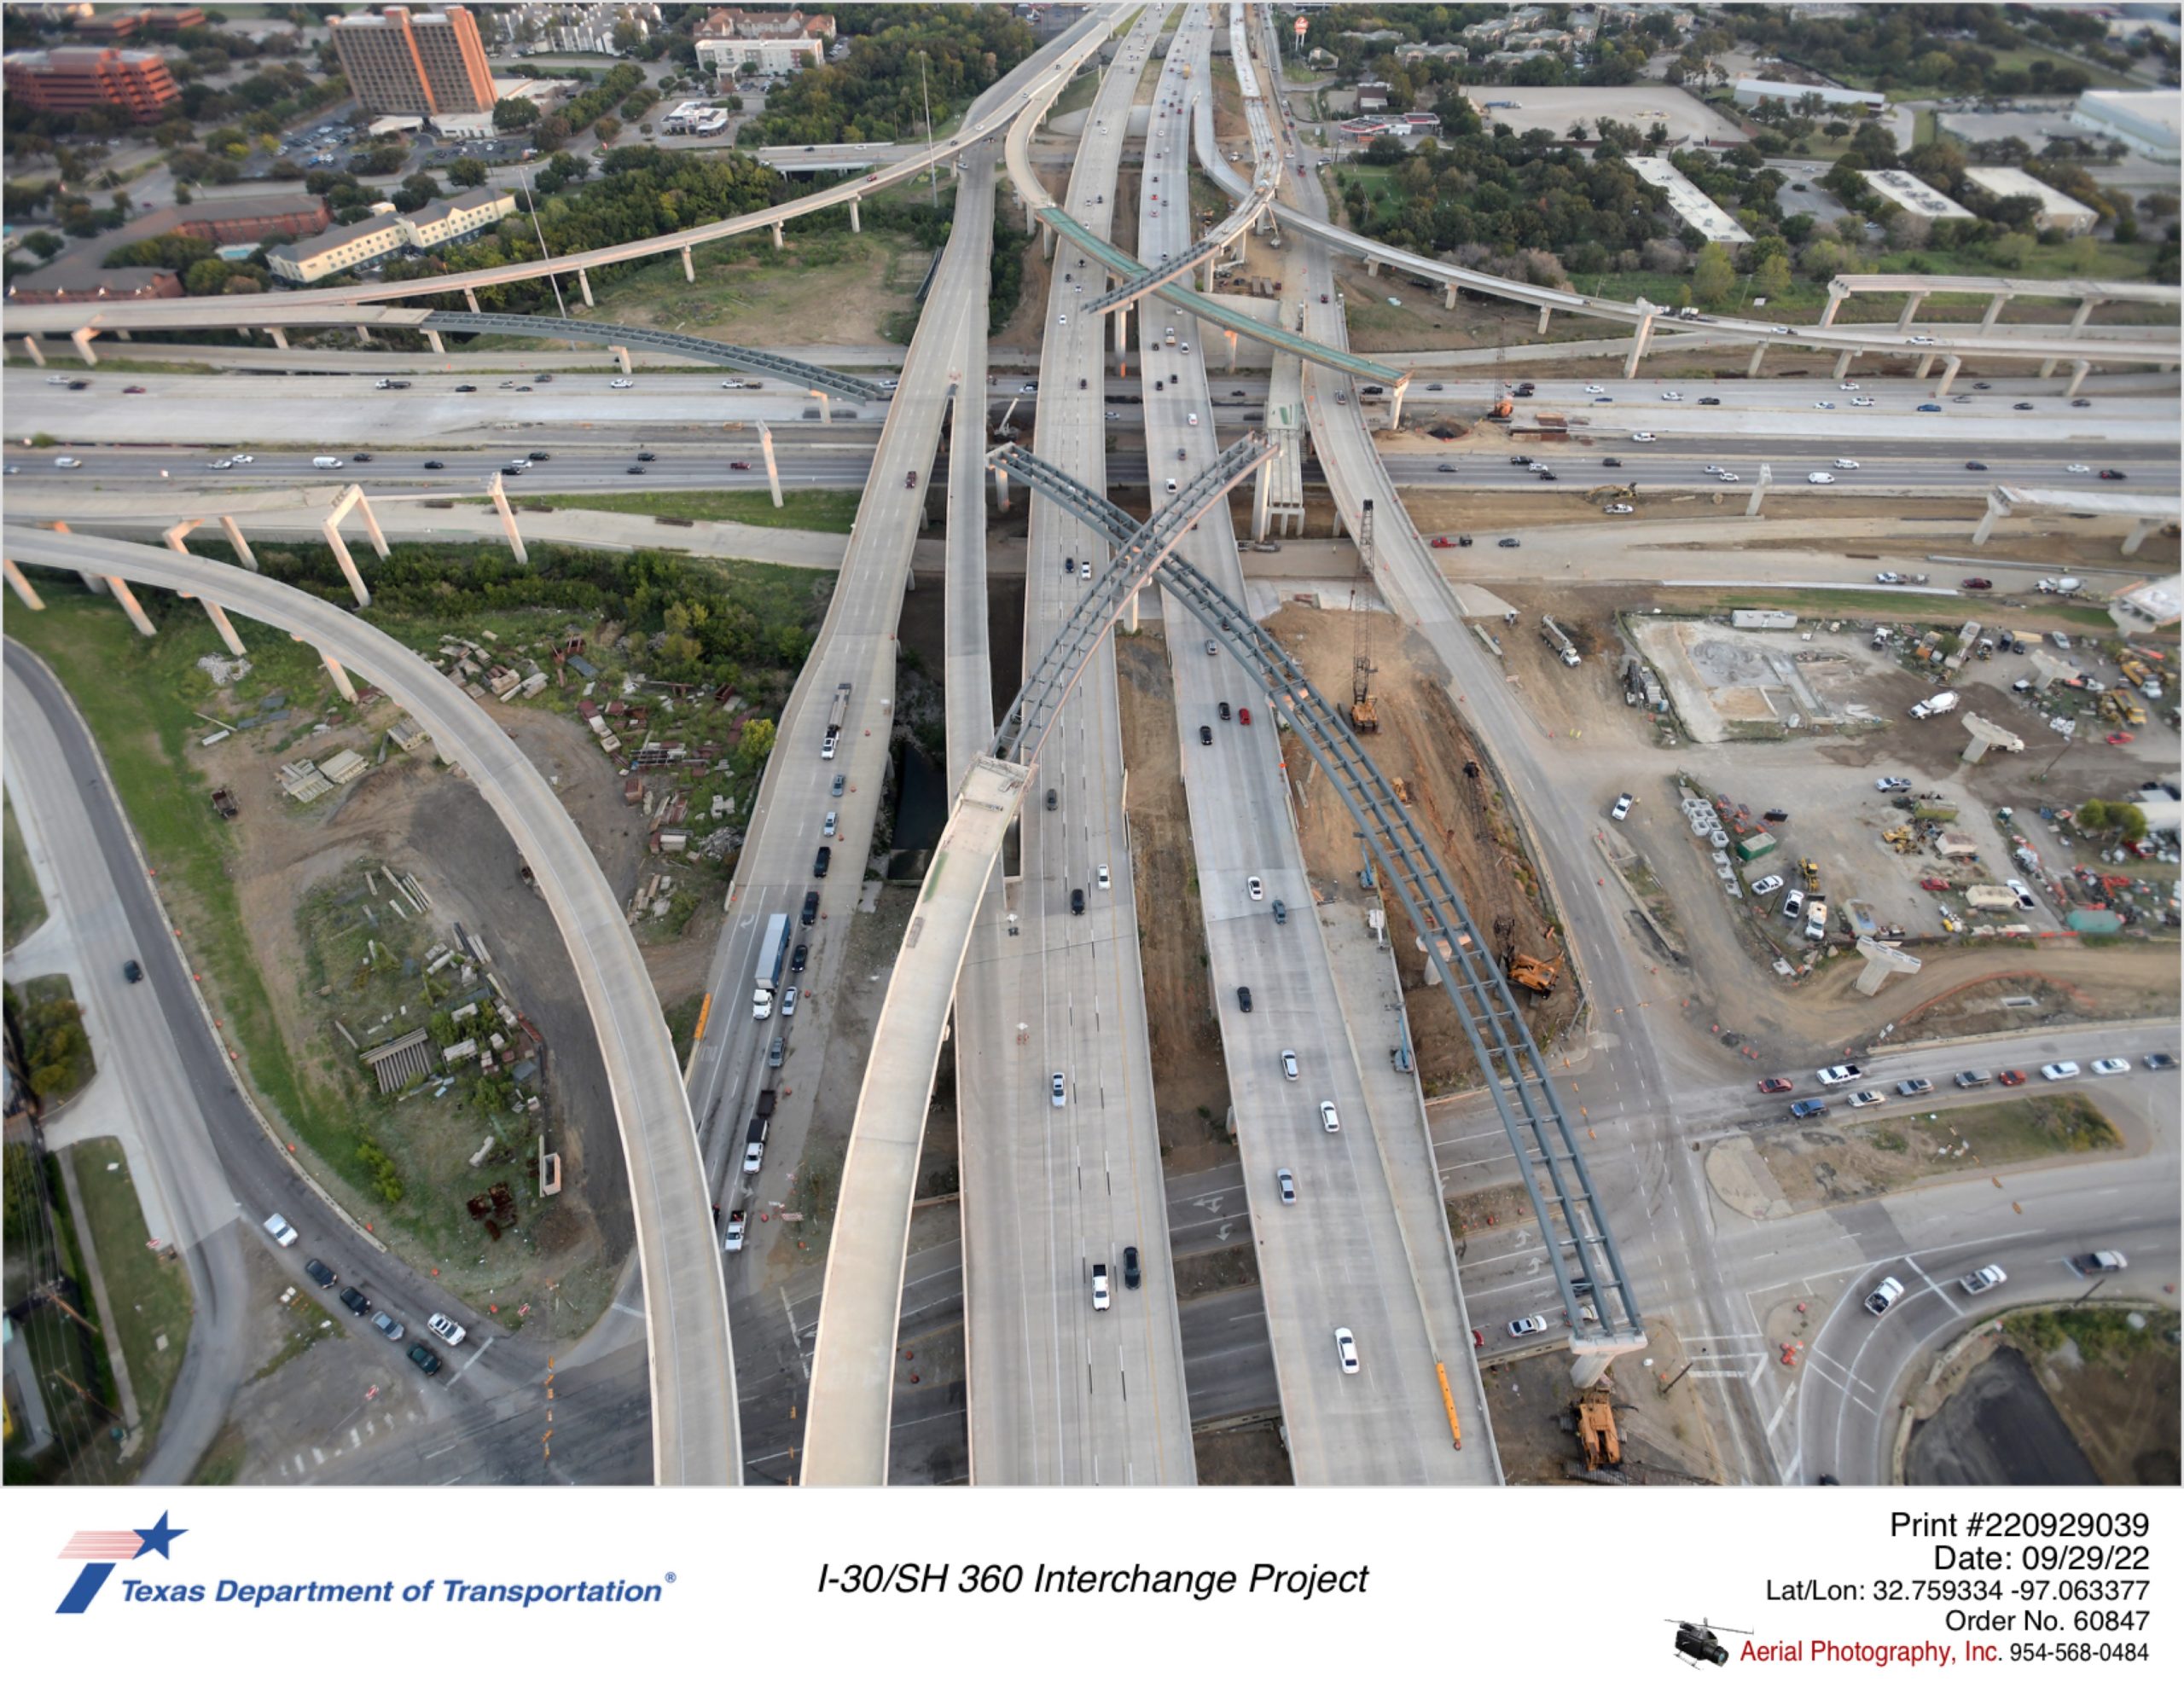 SH 360 looking north at I-30 interchange. Construction of direct connectors continues.